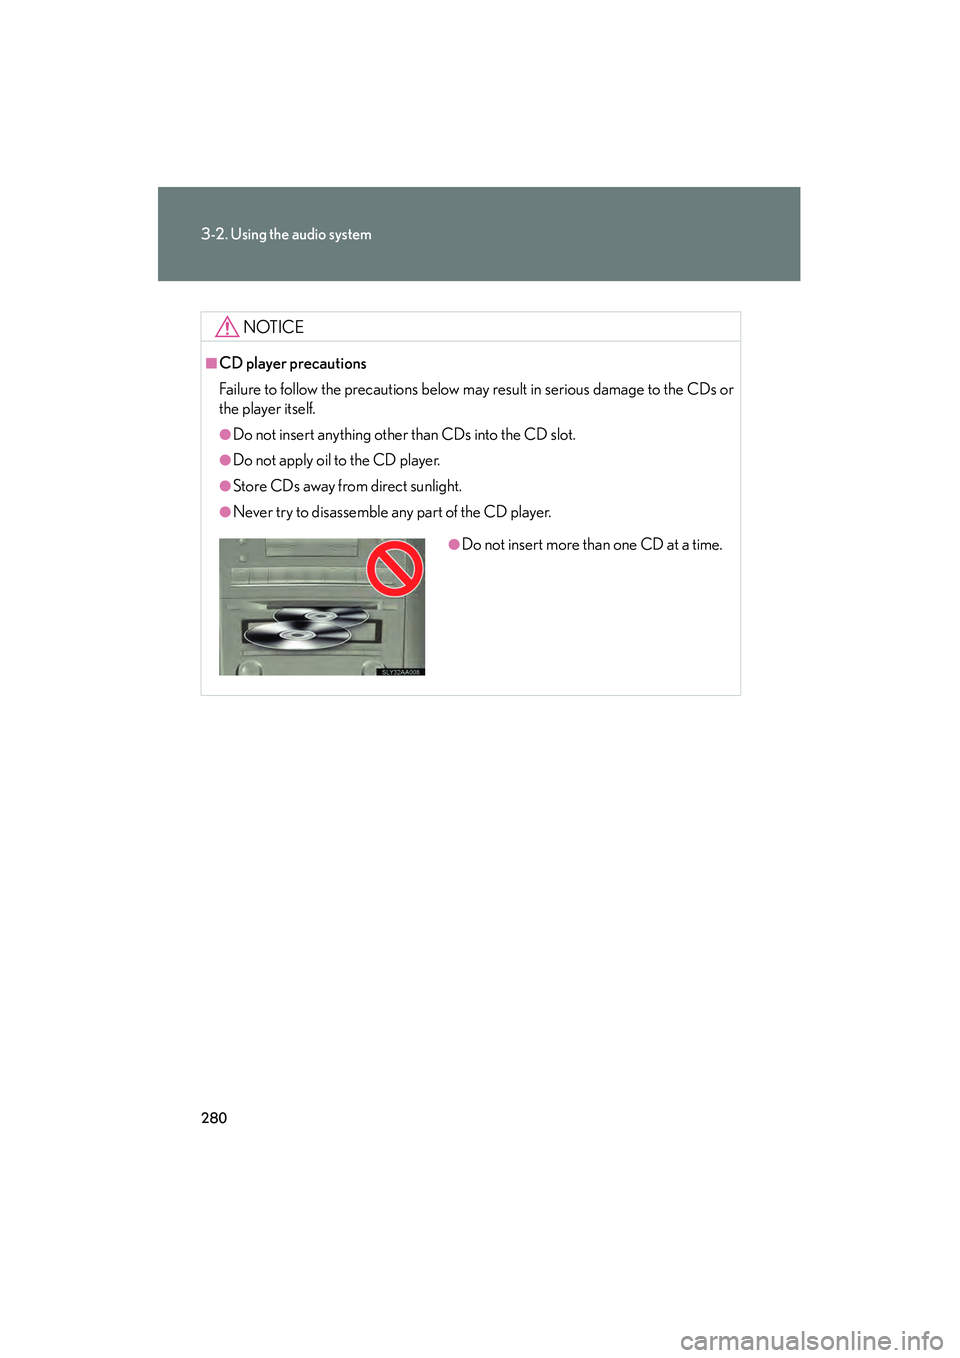 Lexus HS250h 2010  Owners Manual 280
3-2. Using the audio system
HS250h_U_75033U(Canada)
NOTICE
■CD player precautions
Failure to follow the precautions below may result in serious damage to the CDs or
the player itself.
●Do not 